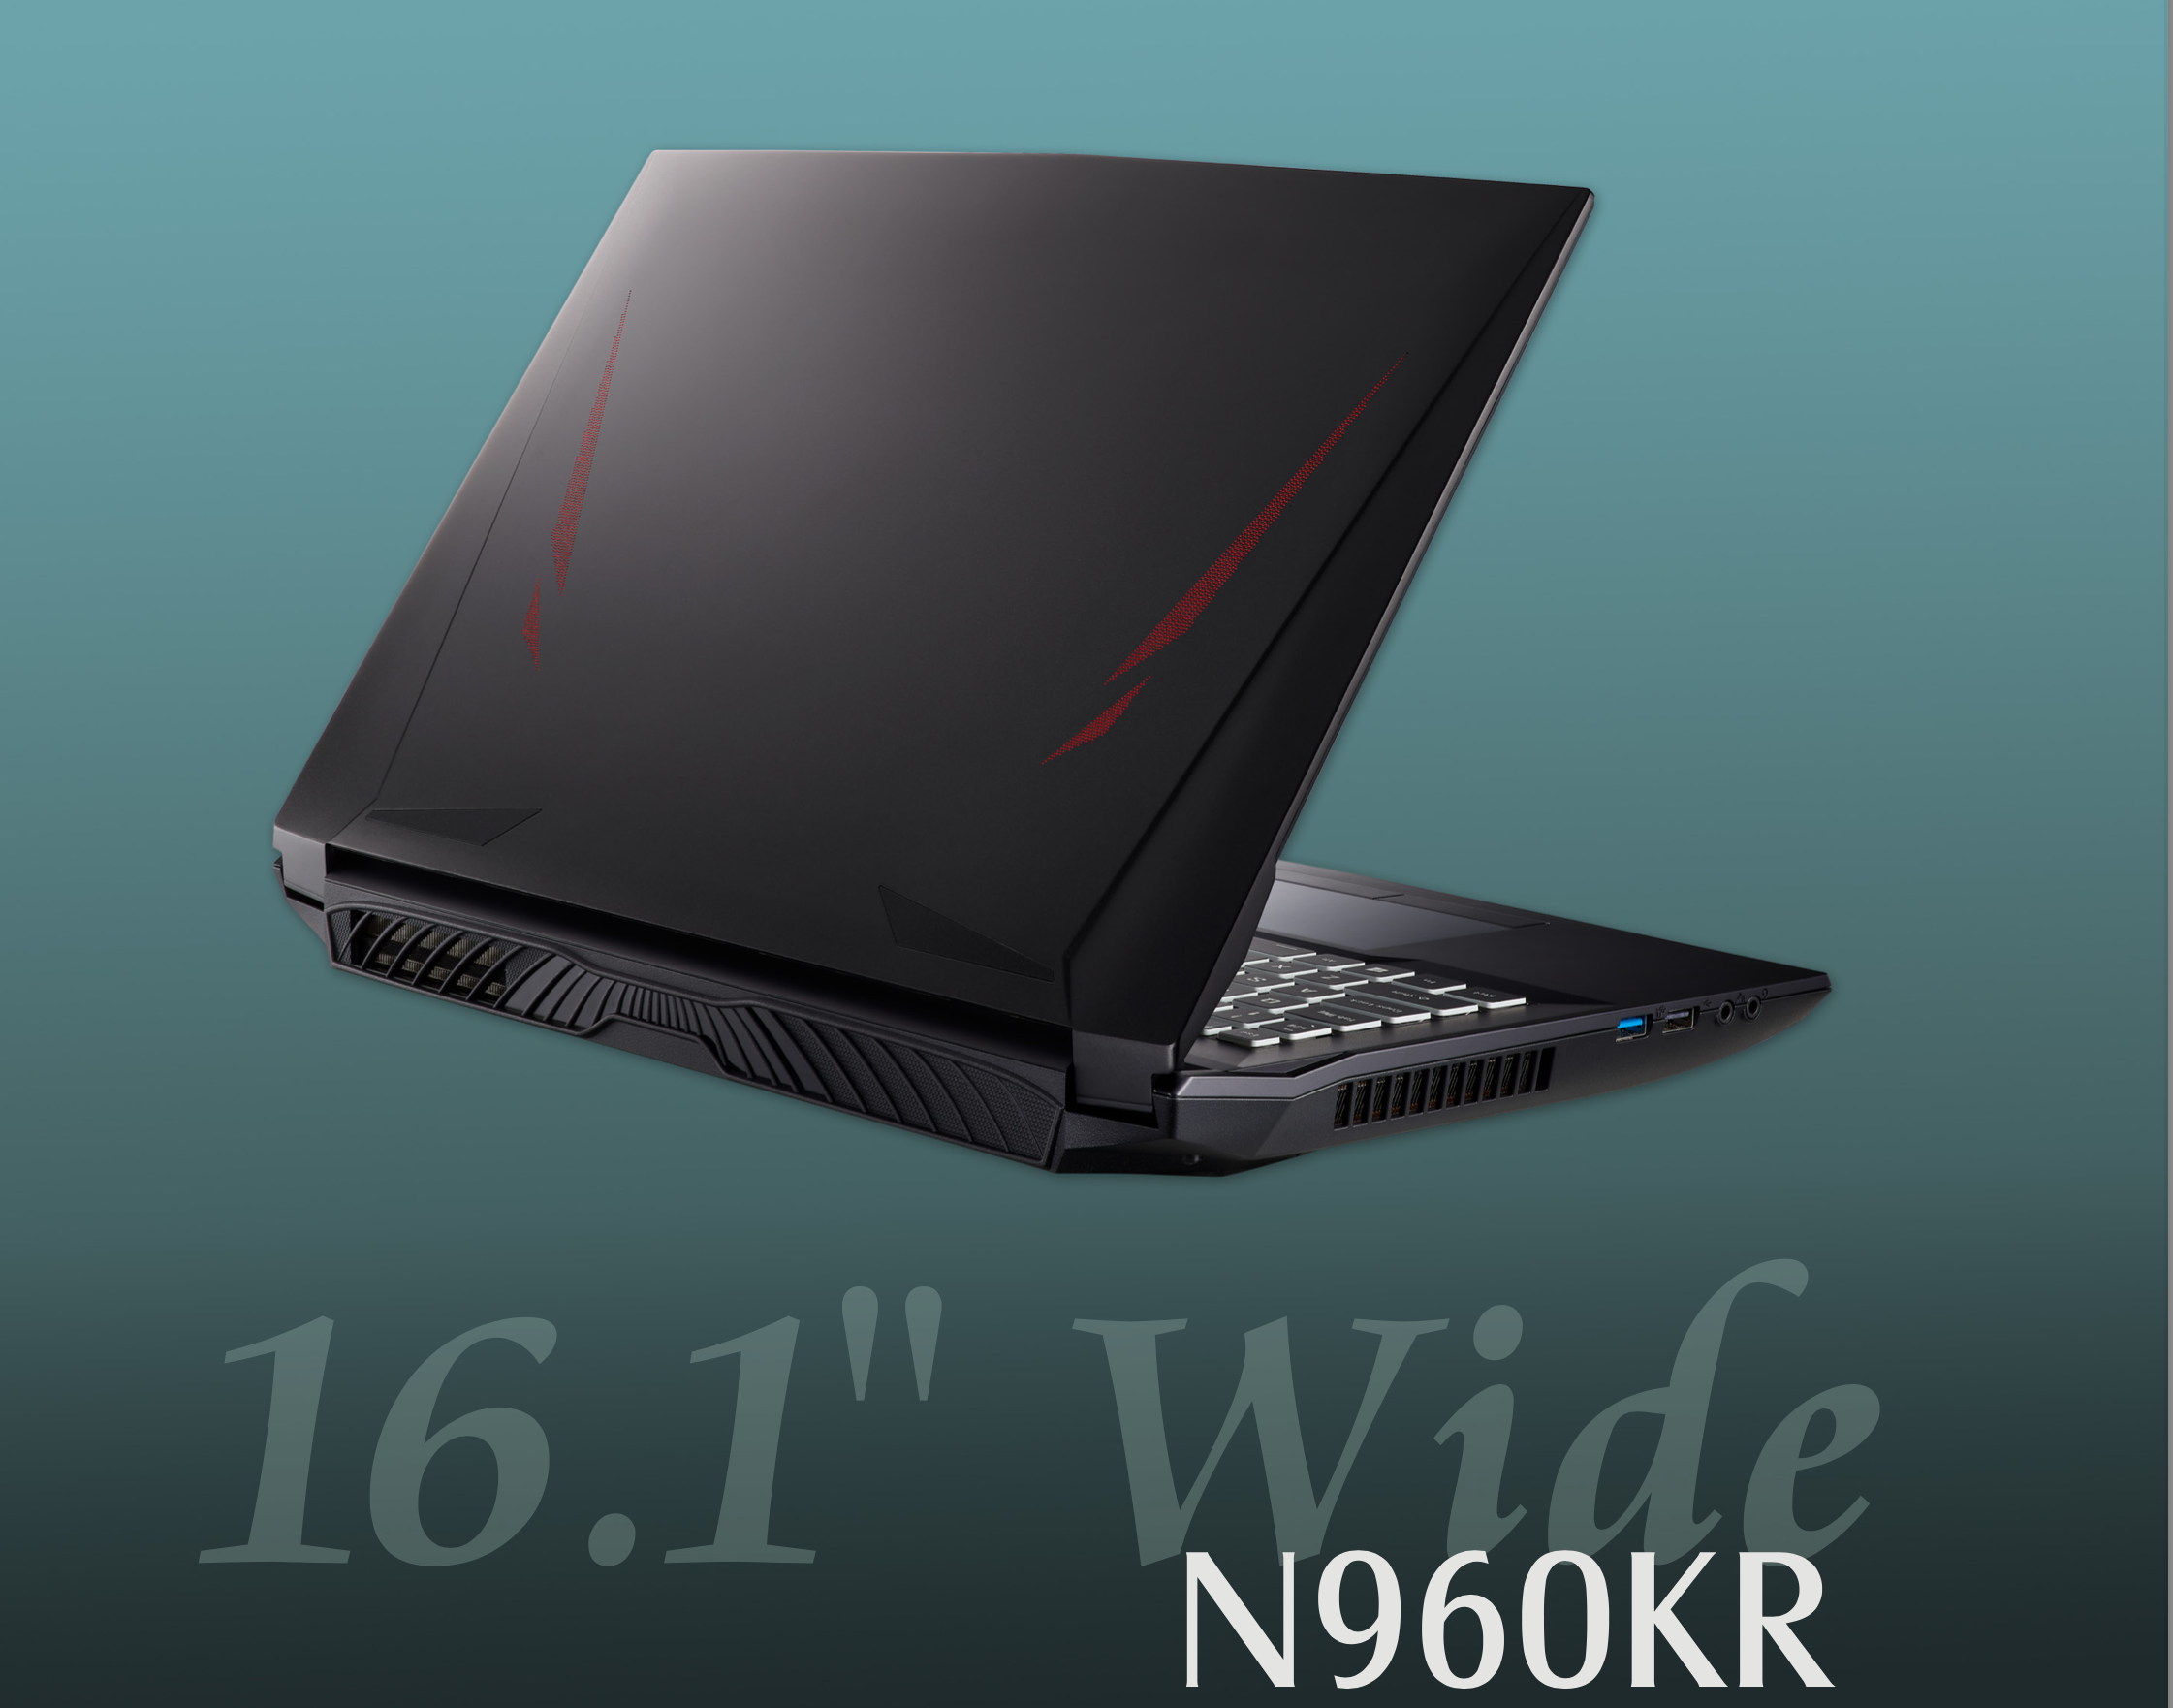 CLEVO N960KR  - CHEAP GAMING LAPTOPS with RTX 3070 8GB